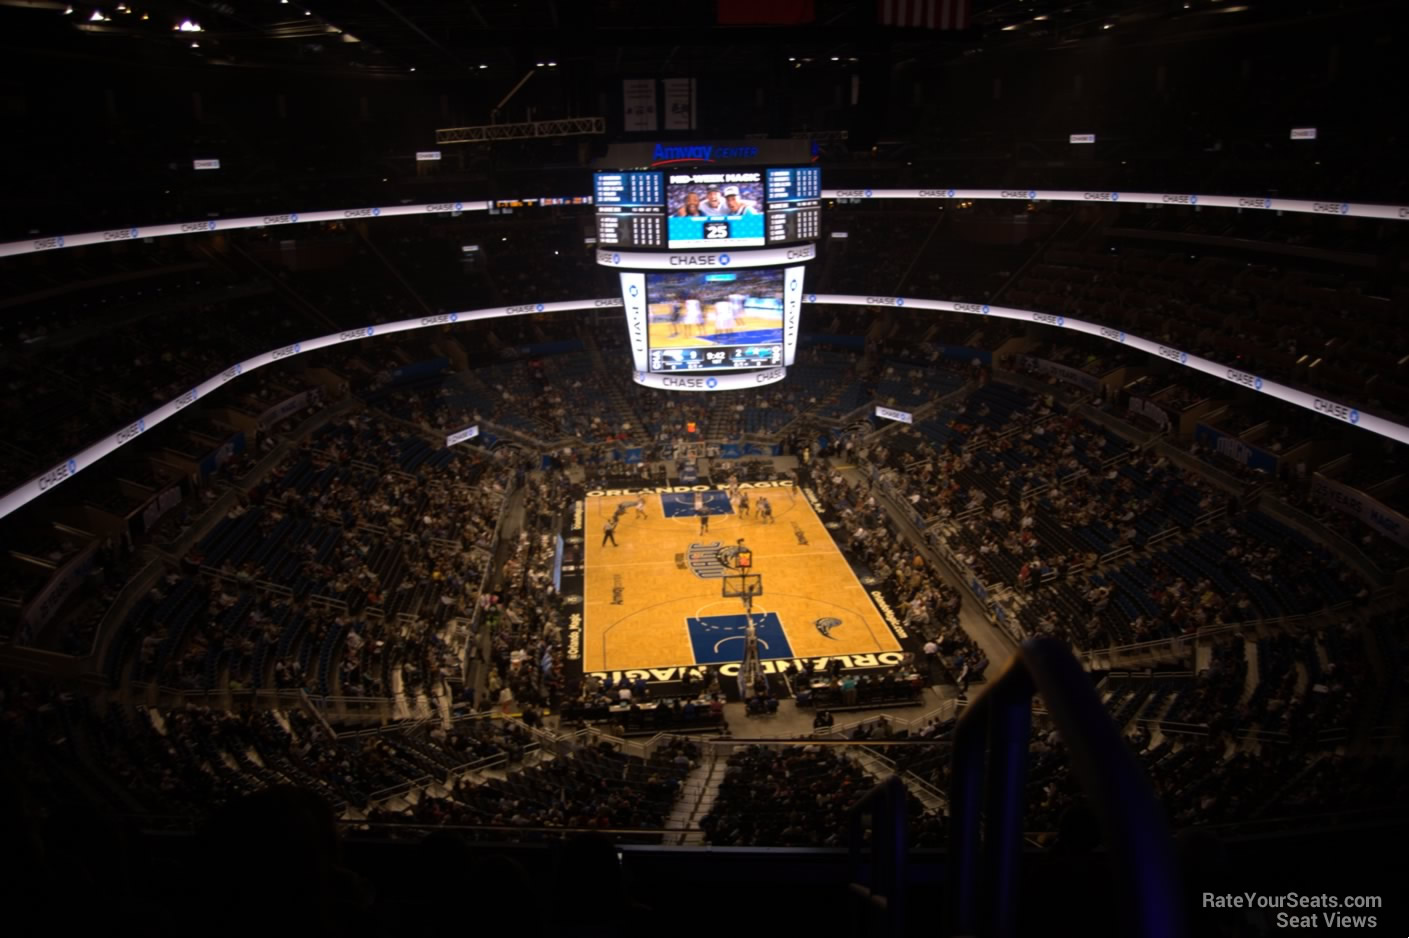 section 202 seat view  for basketball - amway center